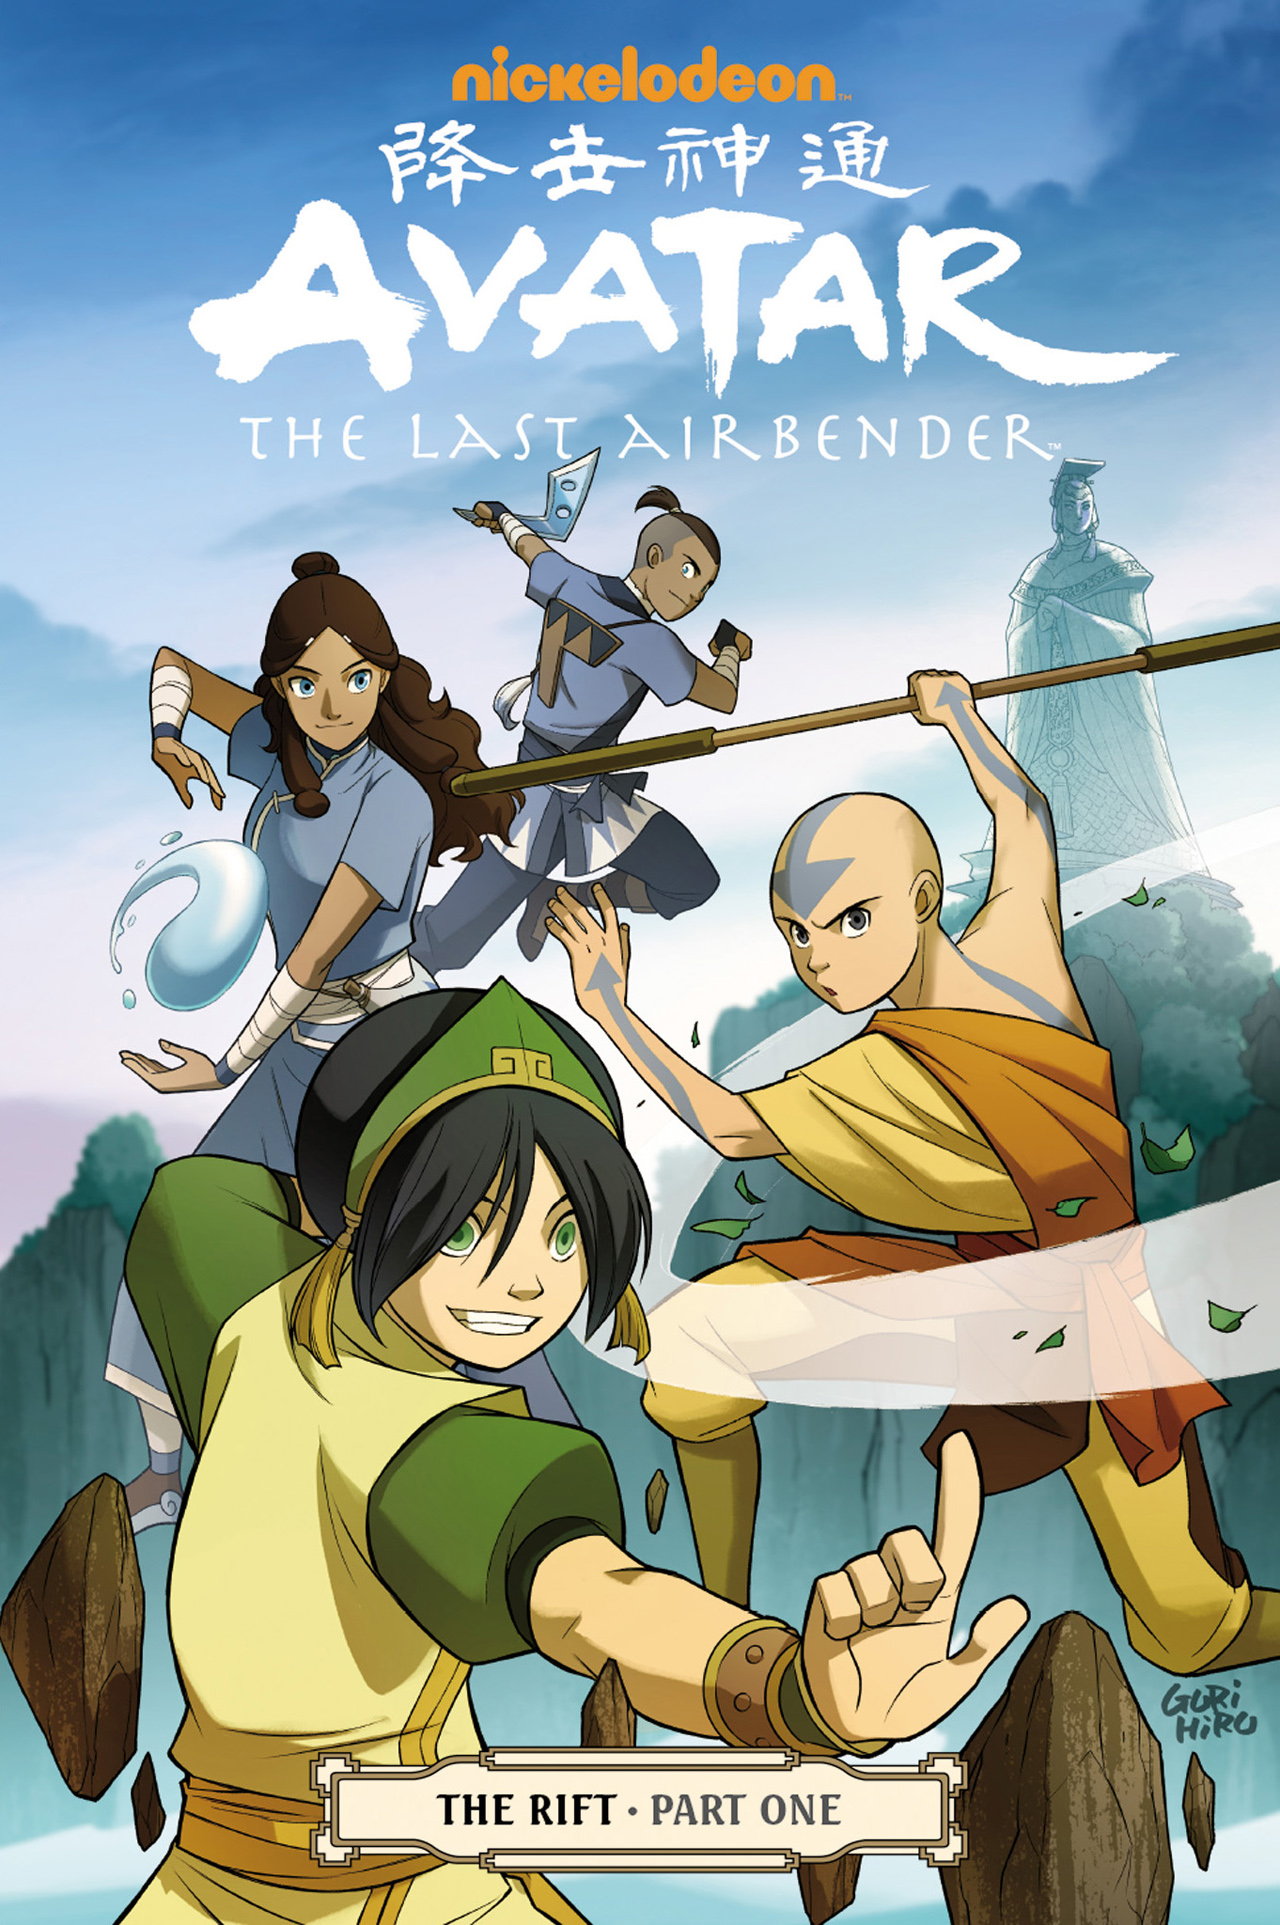 Read online Nickelodeon Avatar: The Last Airbender - The Rift comic -  Issue # Part 1 - 1